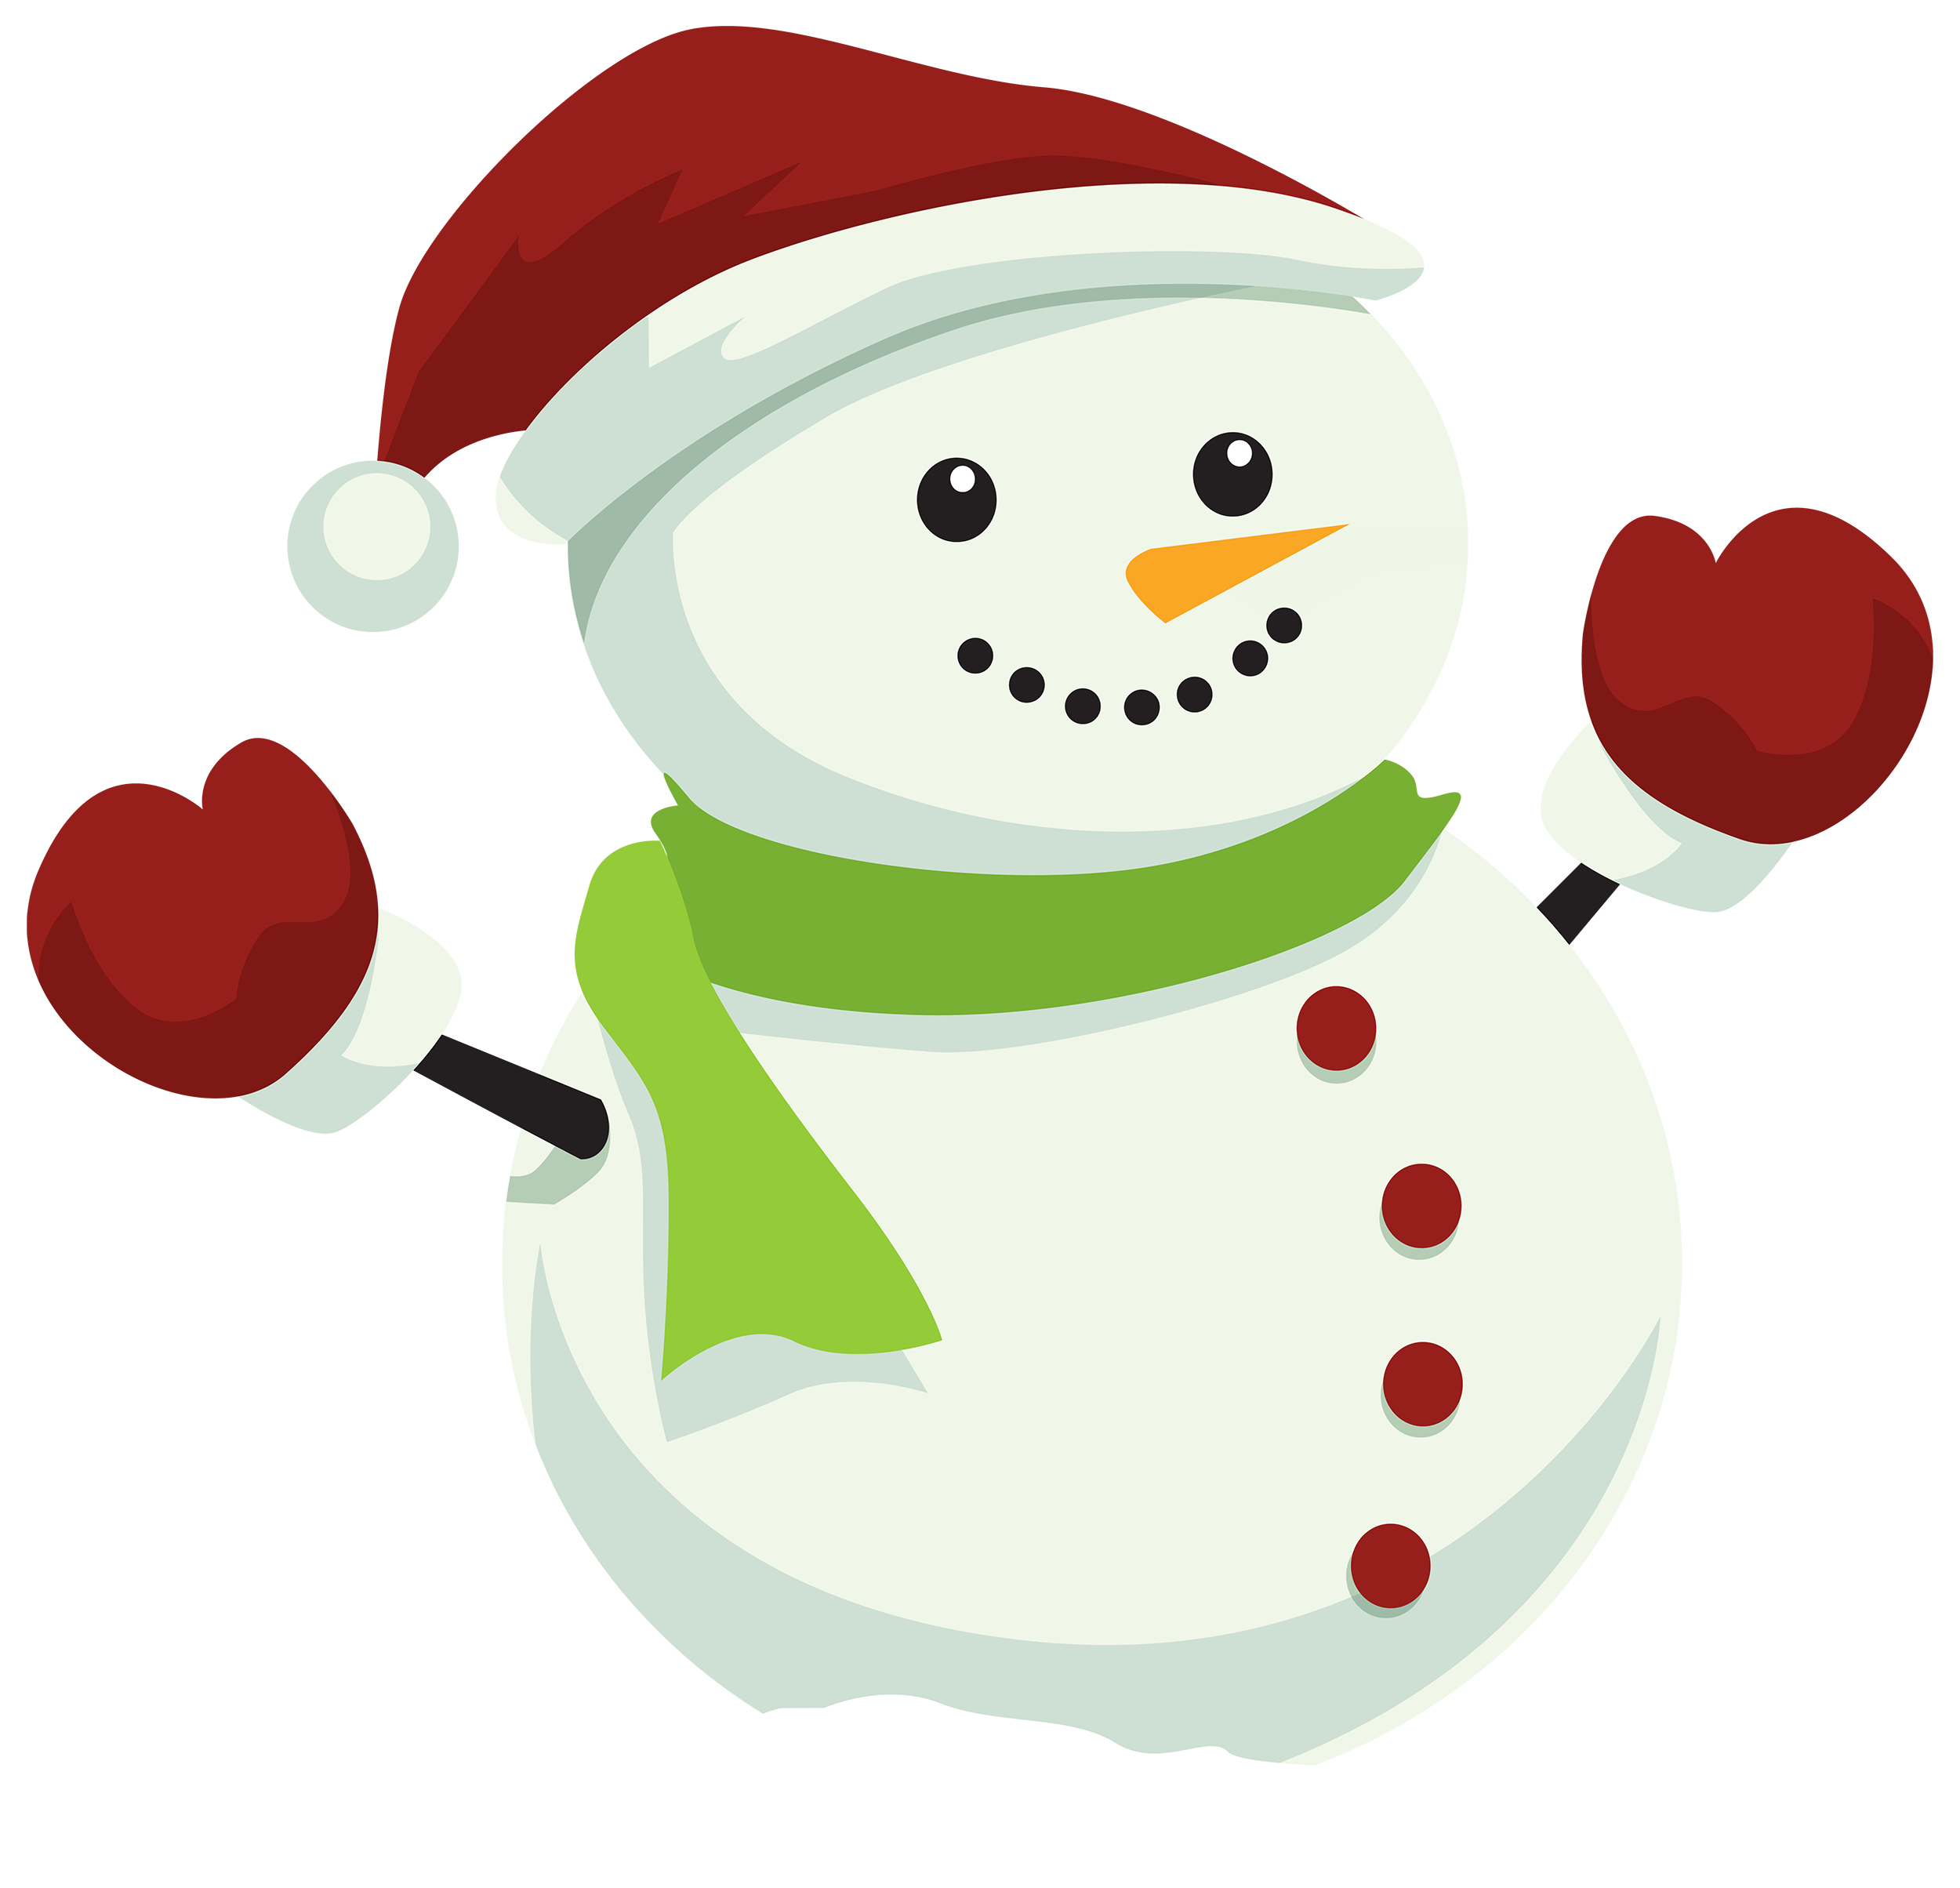 Image result for snowman